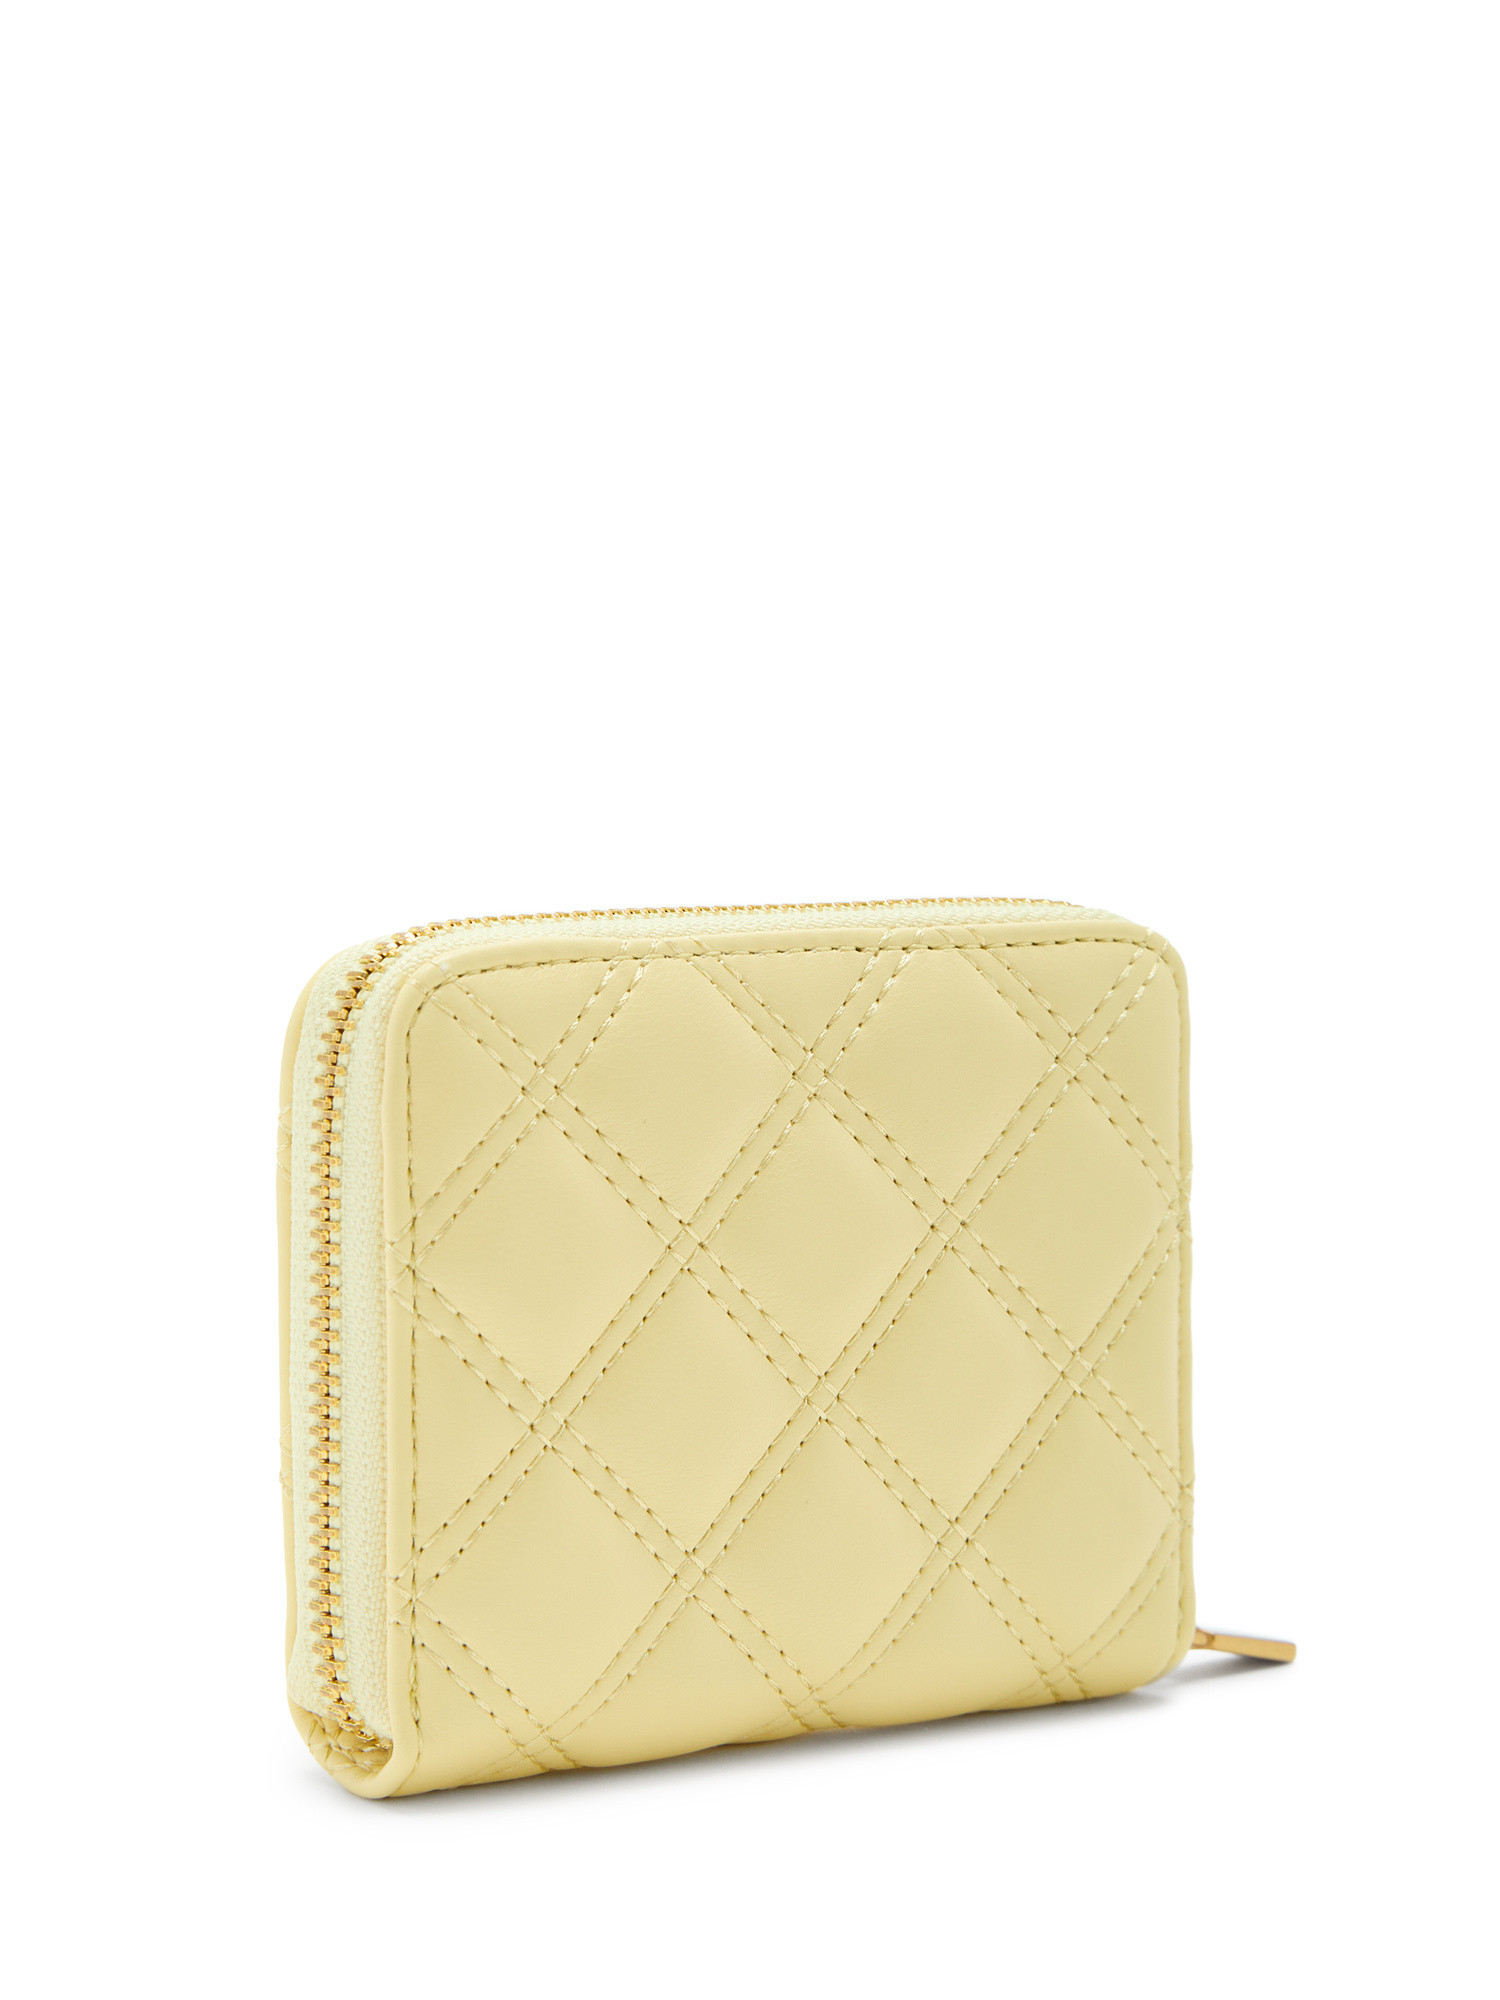 Guess - Giully quilted mini wallet, Yellow, large image number 1